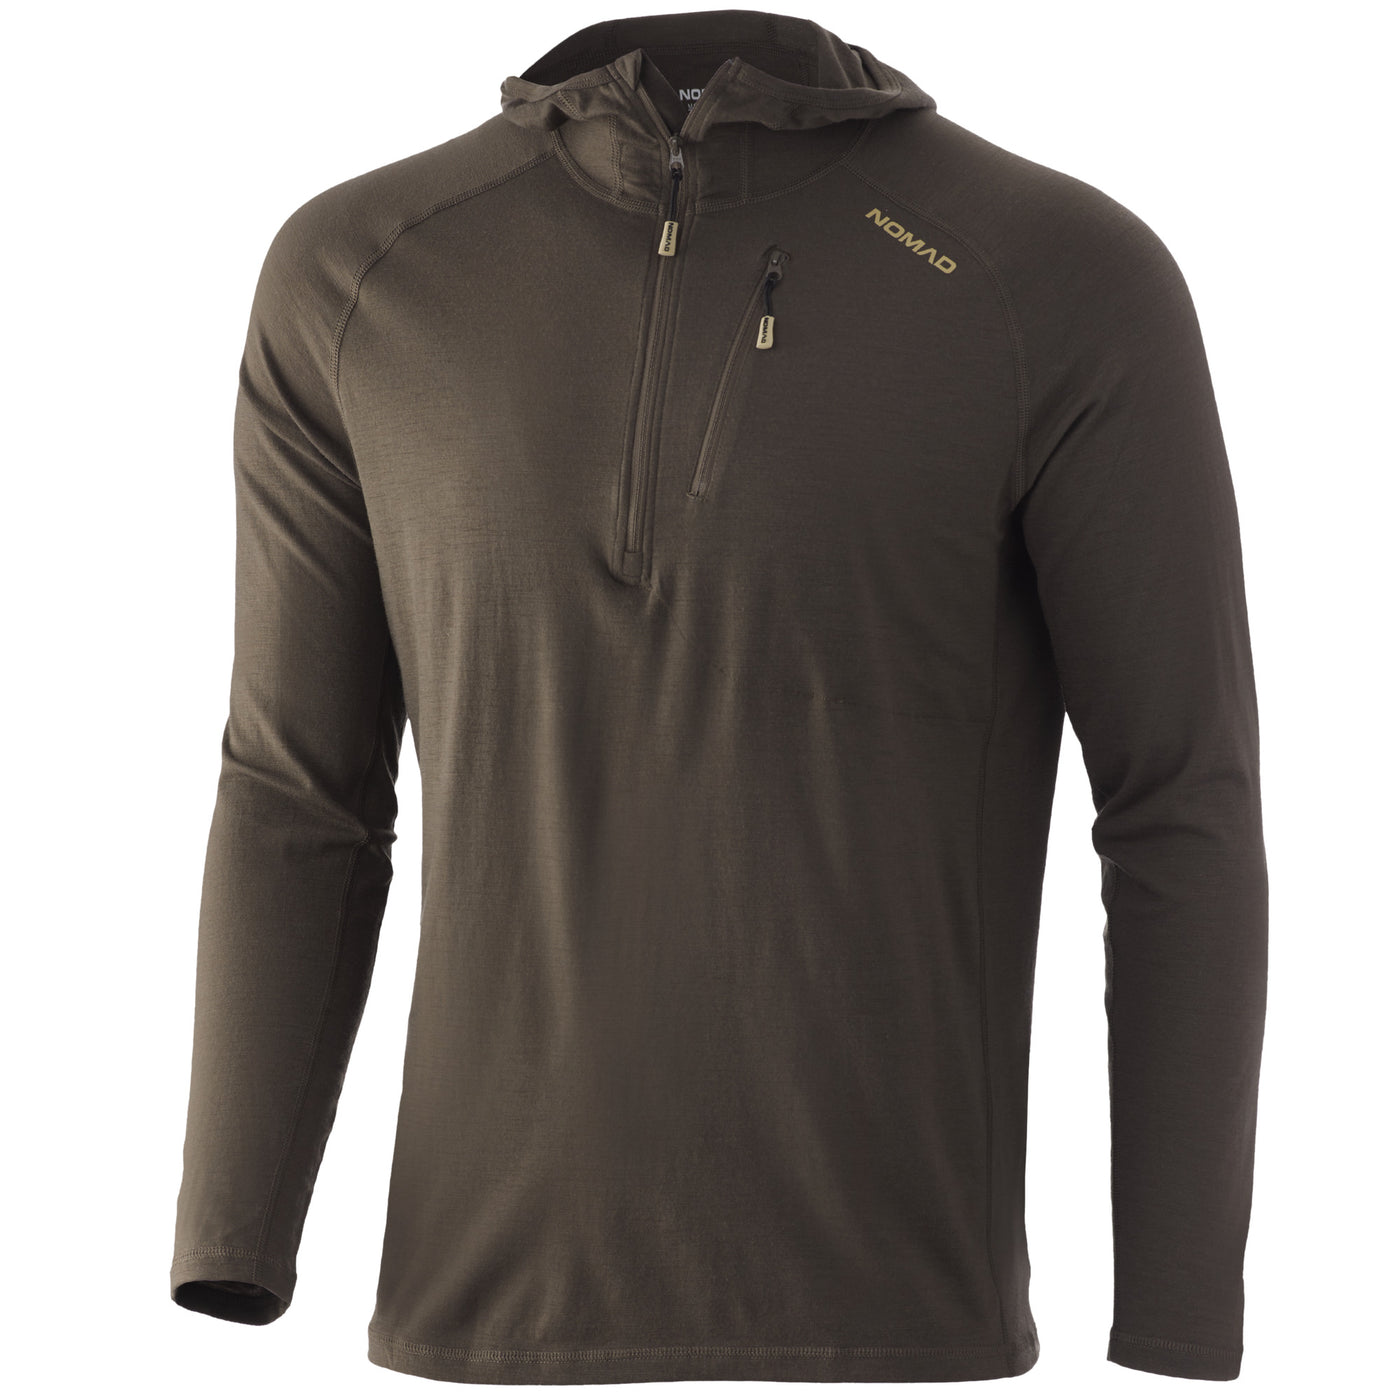 Nomad Durawool Baselayer Hoodie – NOMAD Outdoor